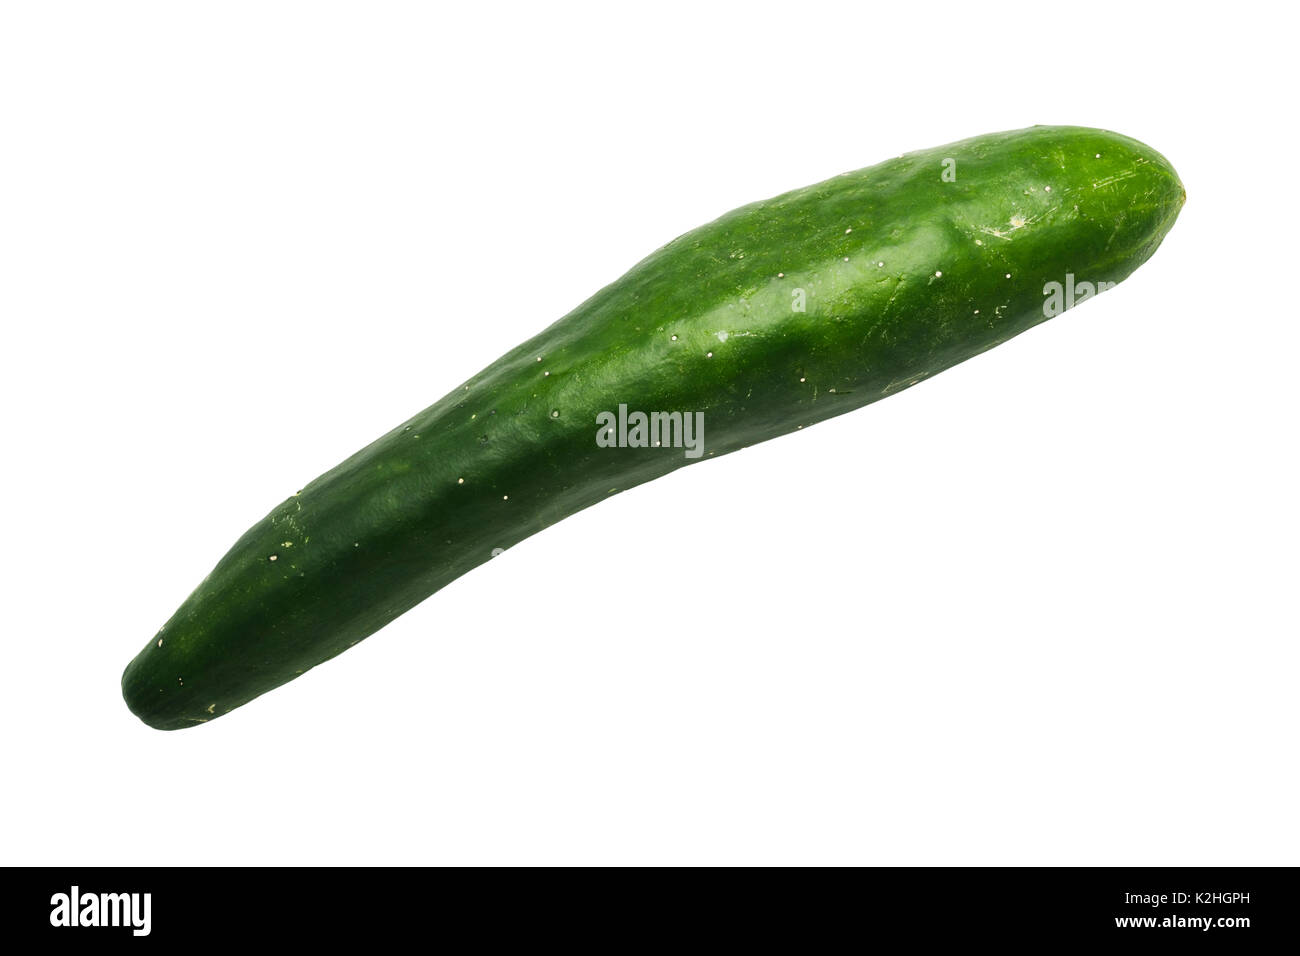 A homegrown organic cucumber on a white background Stock Photo